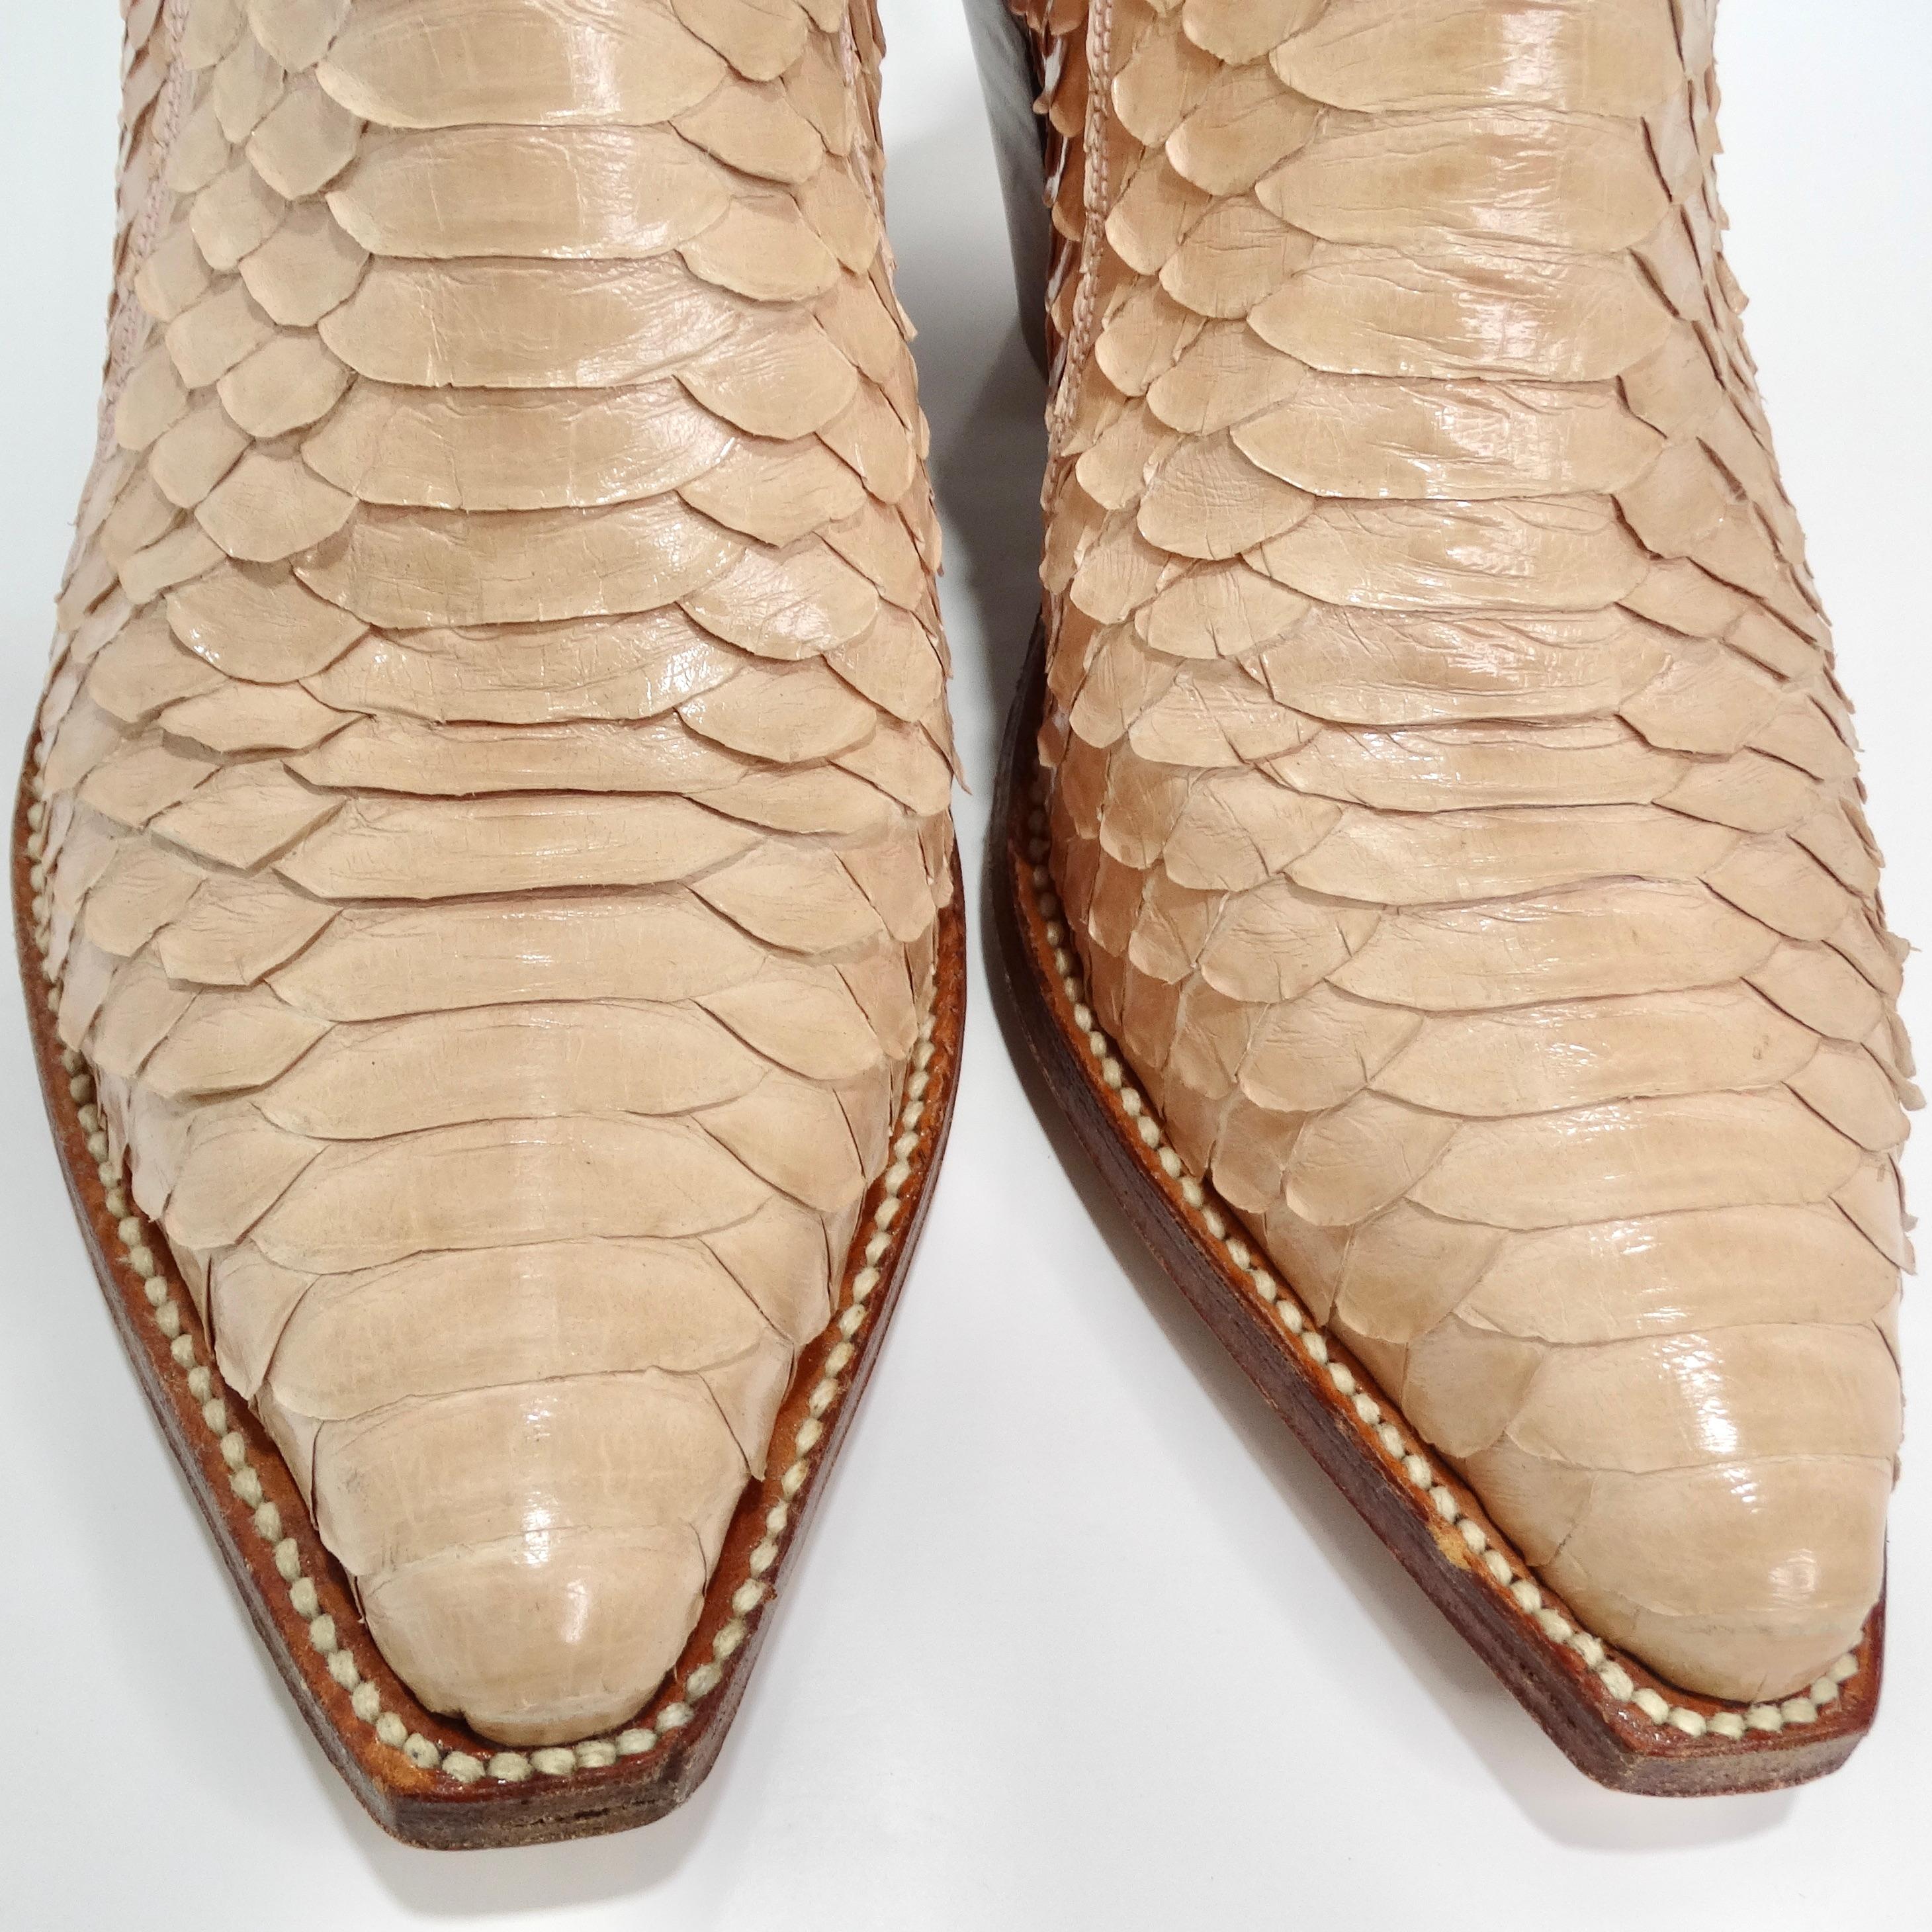 Tony Mora Beige Python Ankle Boots In Good Condition For Sale In Scottsdale, AZ